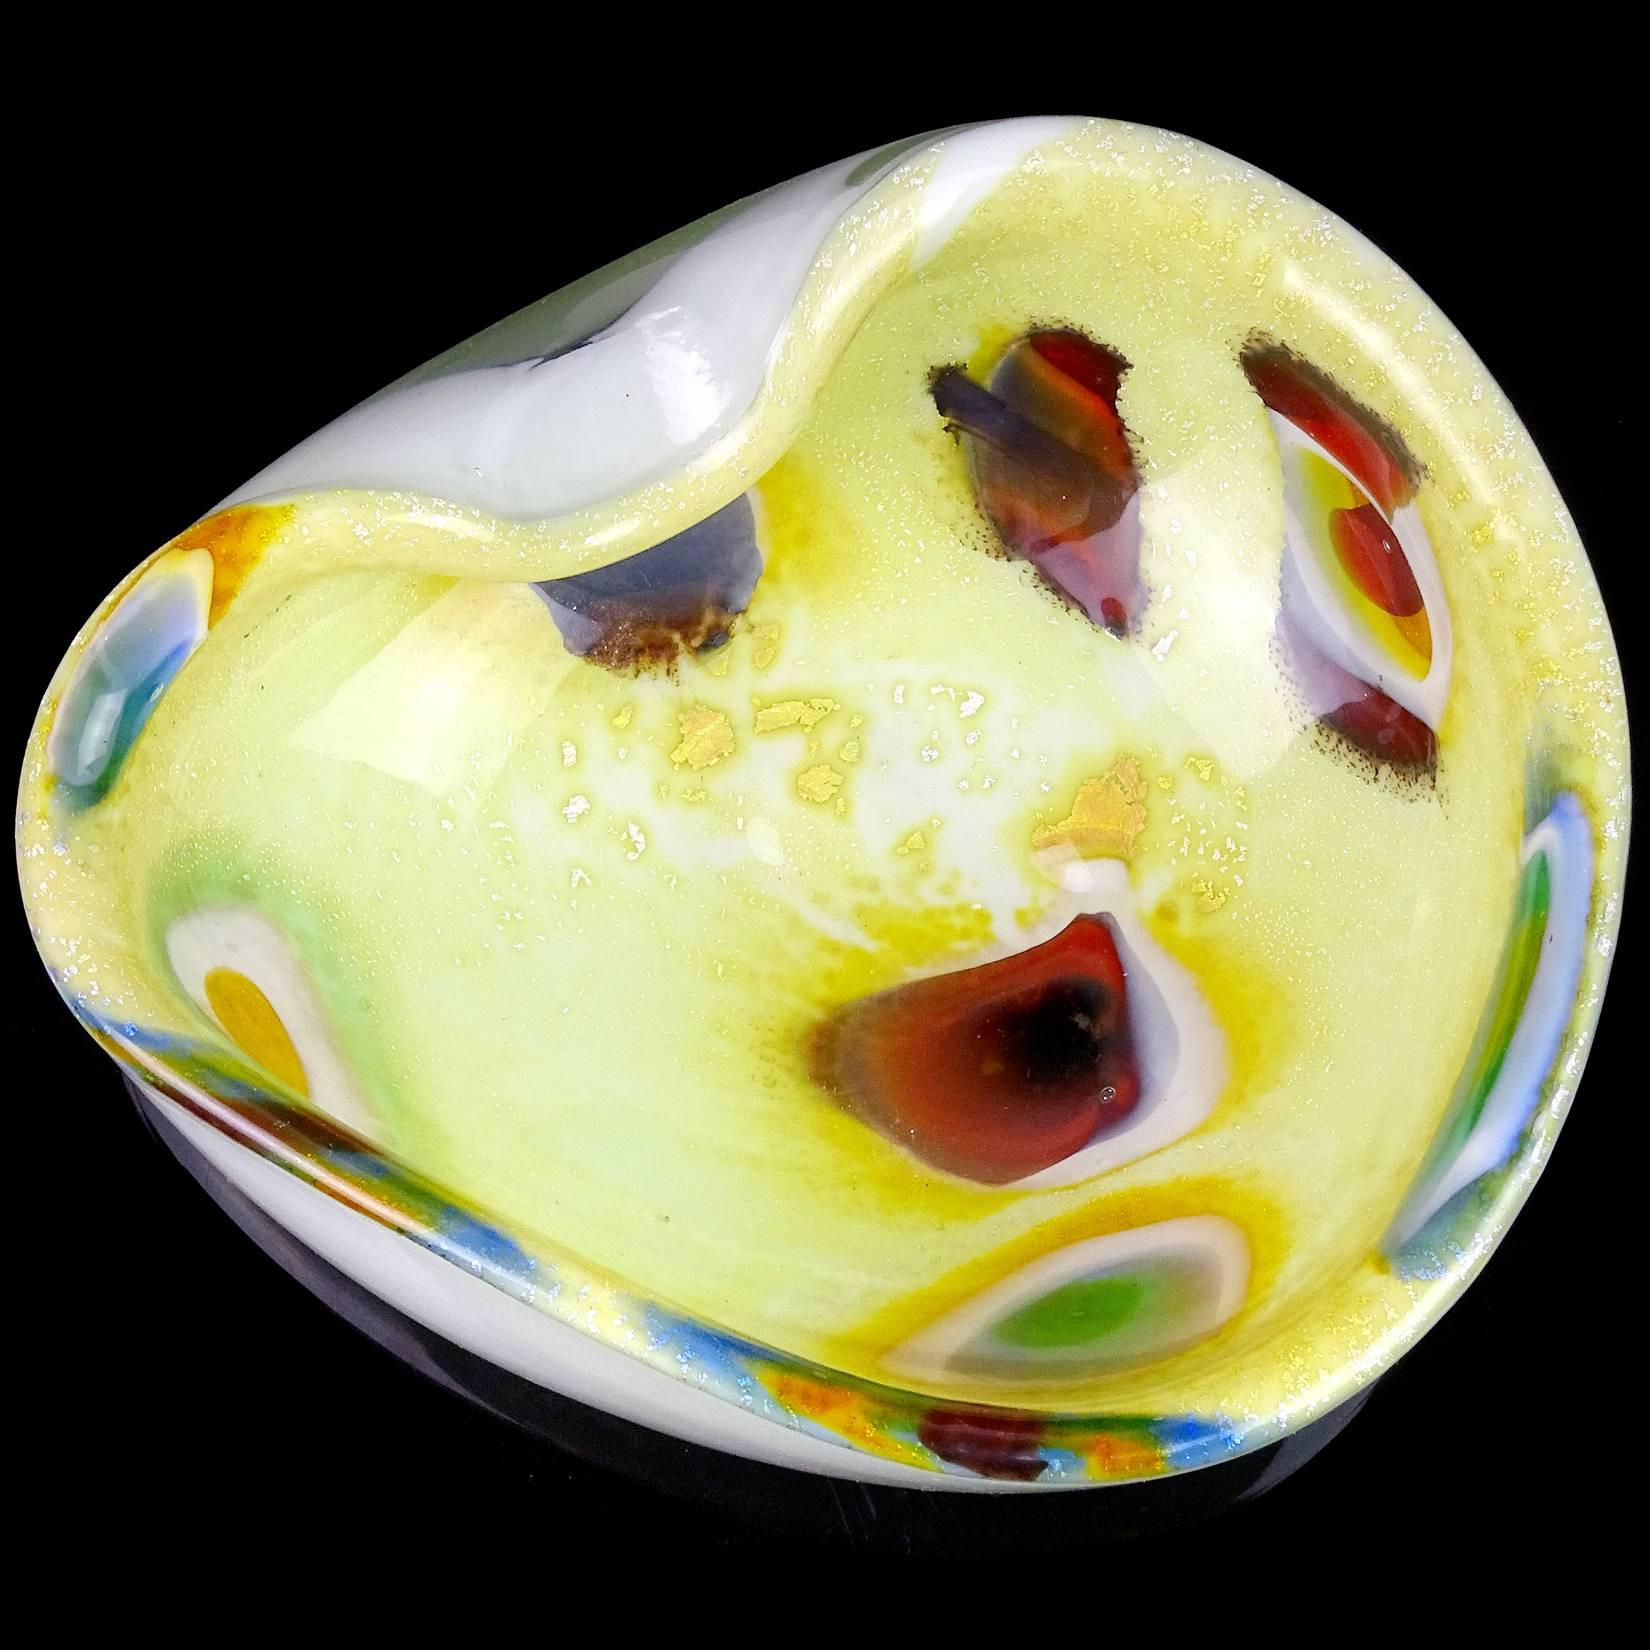 Beautiful Murano handblown white with silver flecks, yellow and peacock eye murrines Italian art glass bowl. The piece has a creamy yellow color, with decorative fold on the rim. Measures: 6 1/2